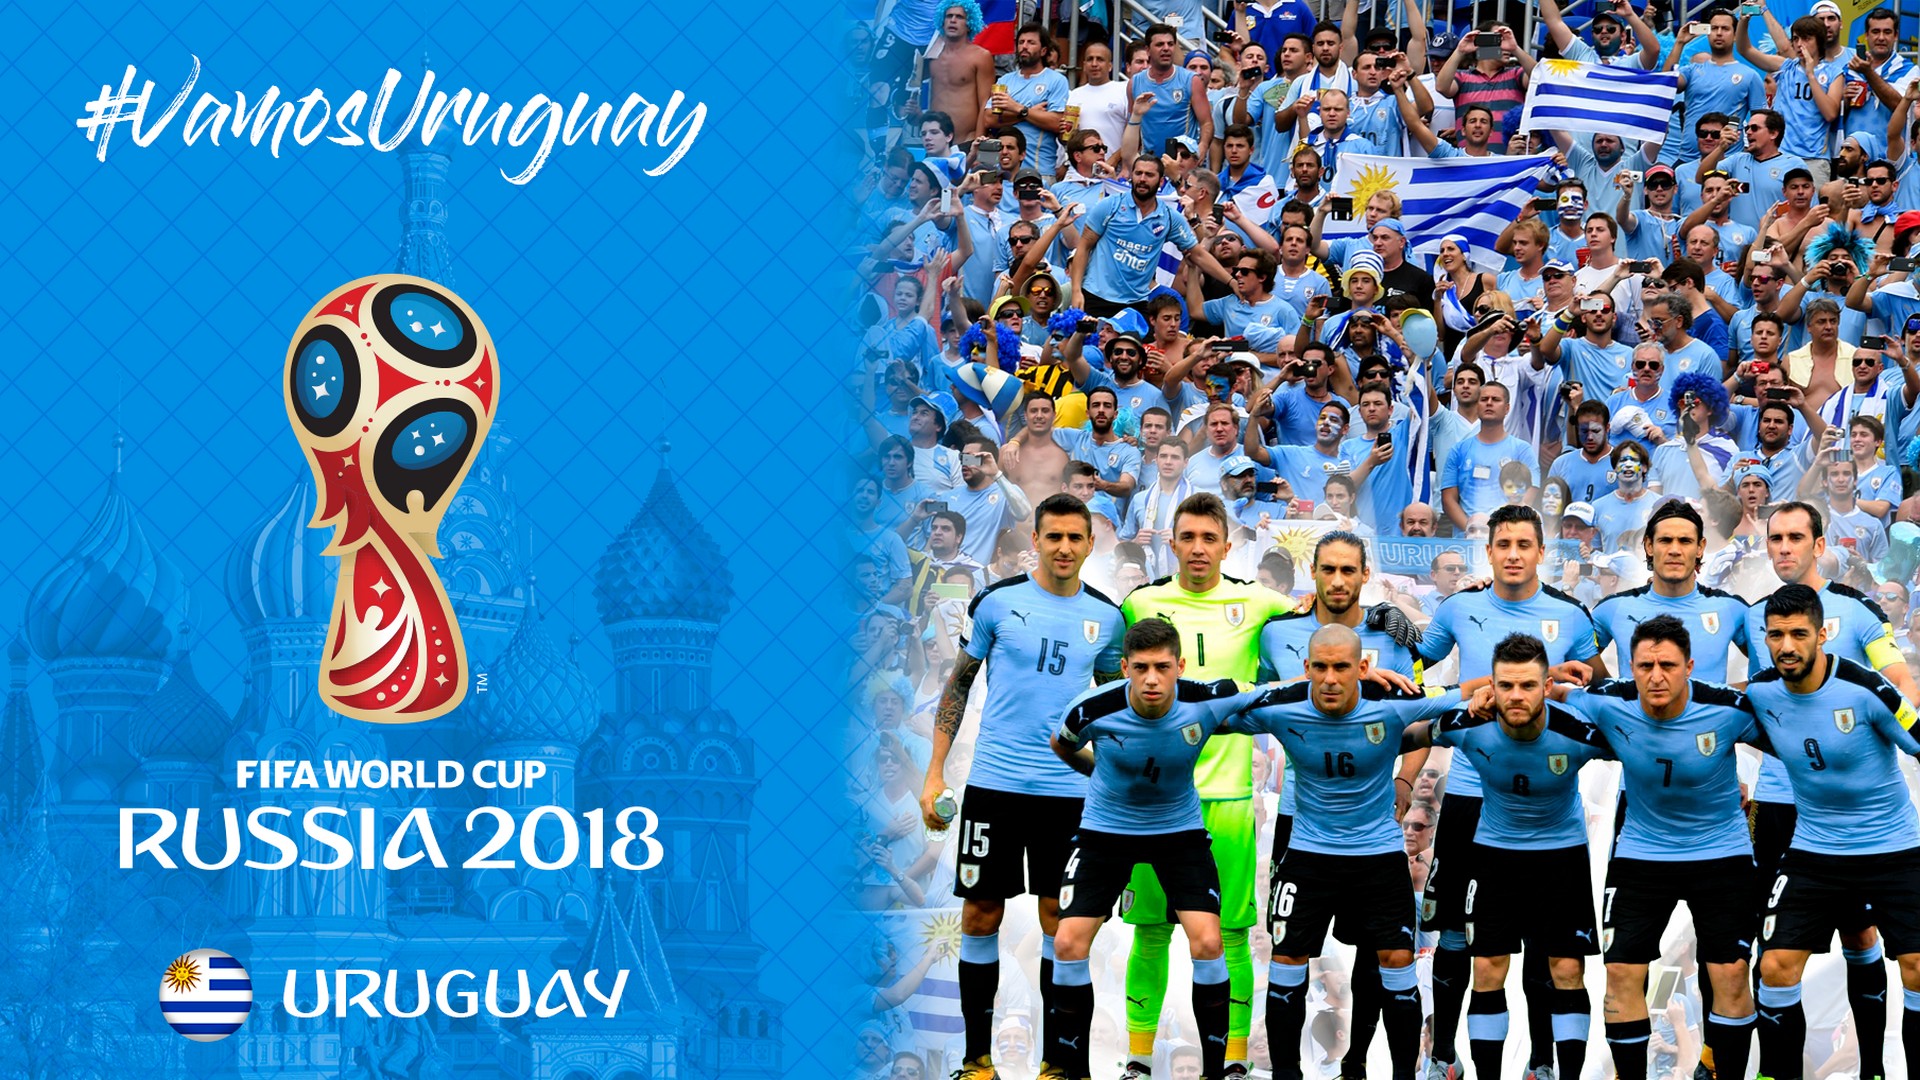 Uruguay National Team Desktop Wallpaper with resolution 1920X1080 pixel. You can use this wallpaper as background for your desktop Computer Screensavers, Android or iPhone smartphones